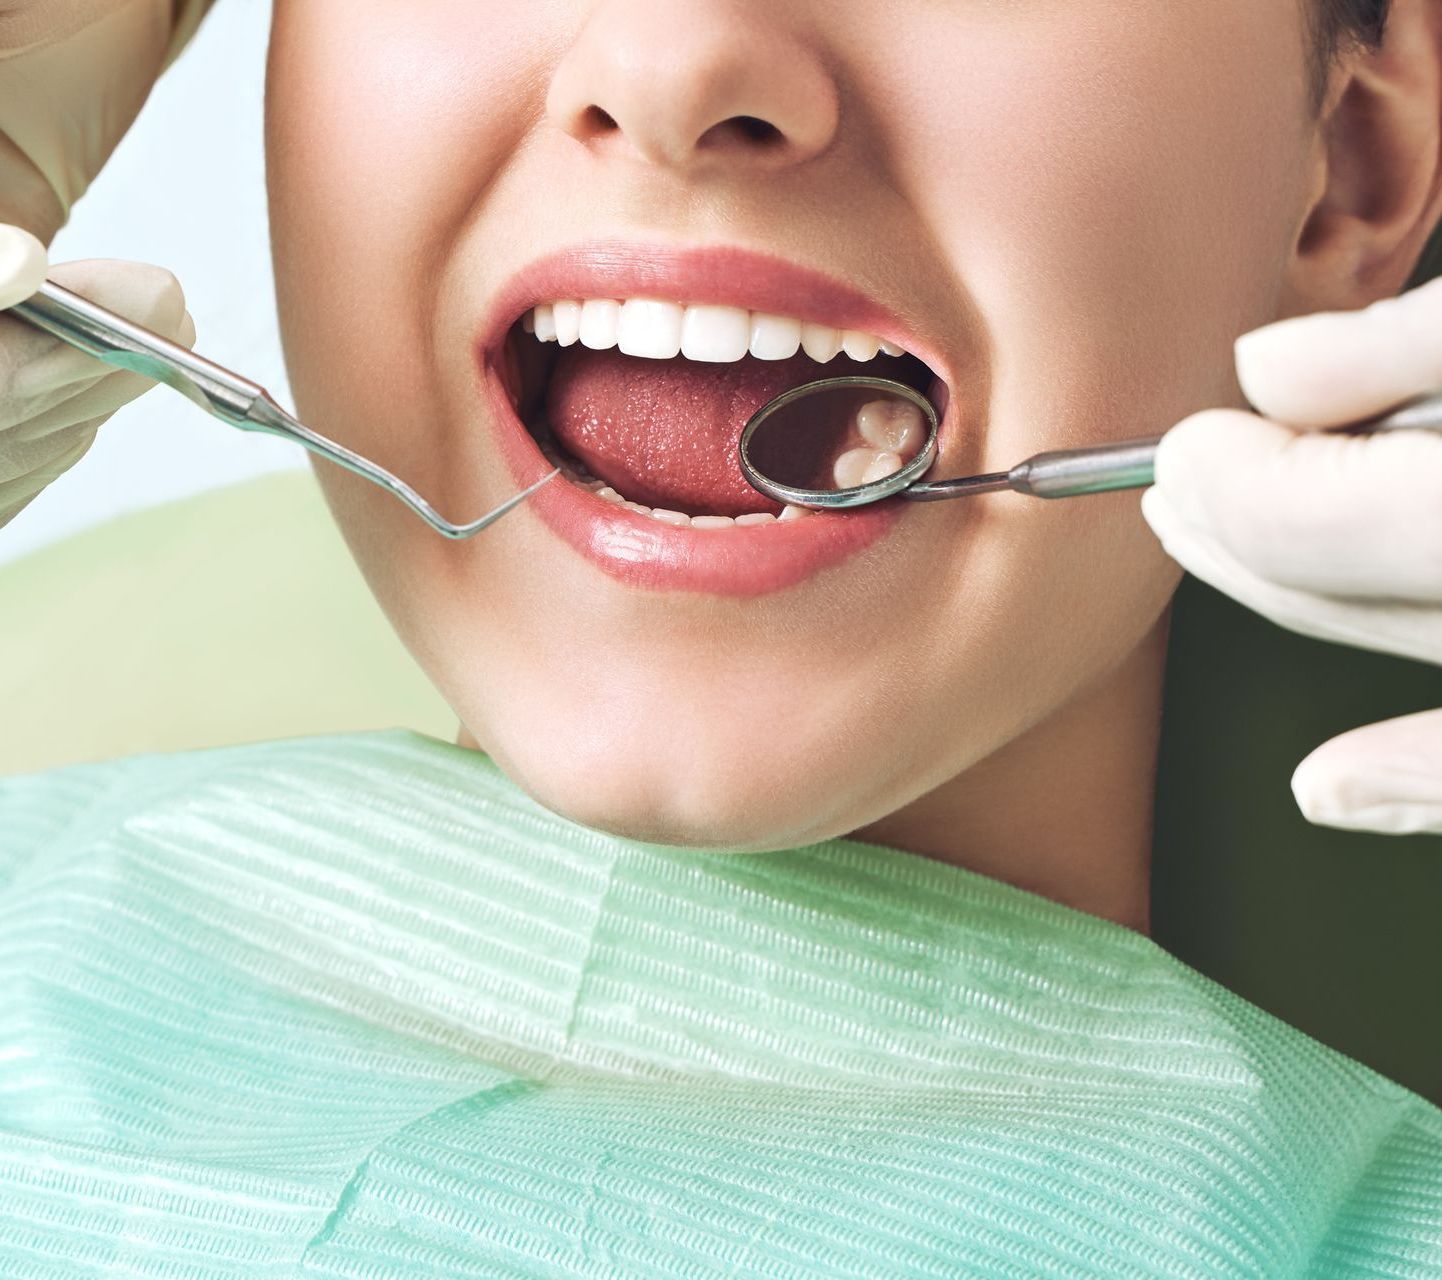 Woman with mouth open at dentist | Get composite fillings at our top biodentist clinic in morgantown wv